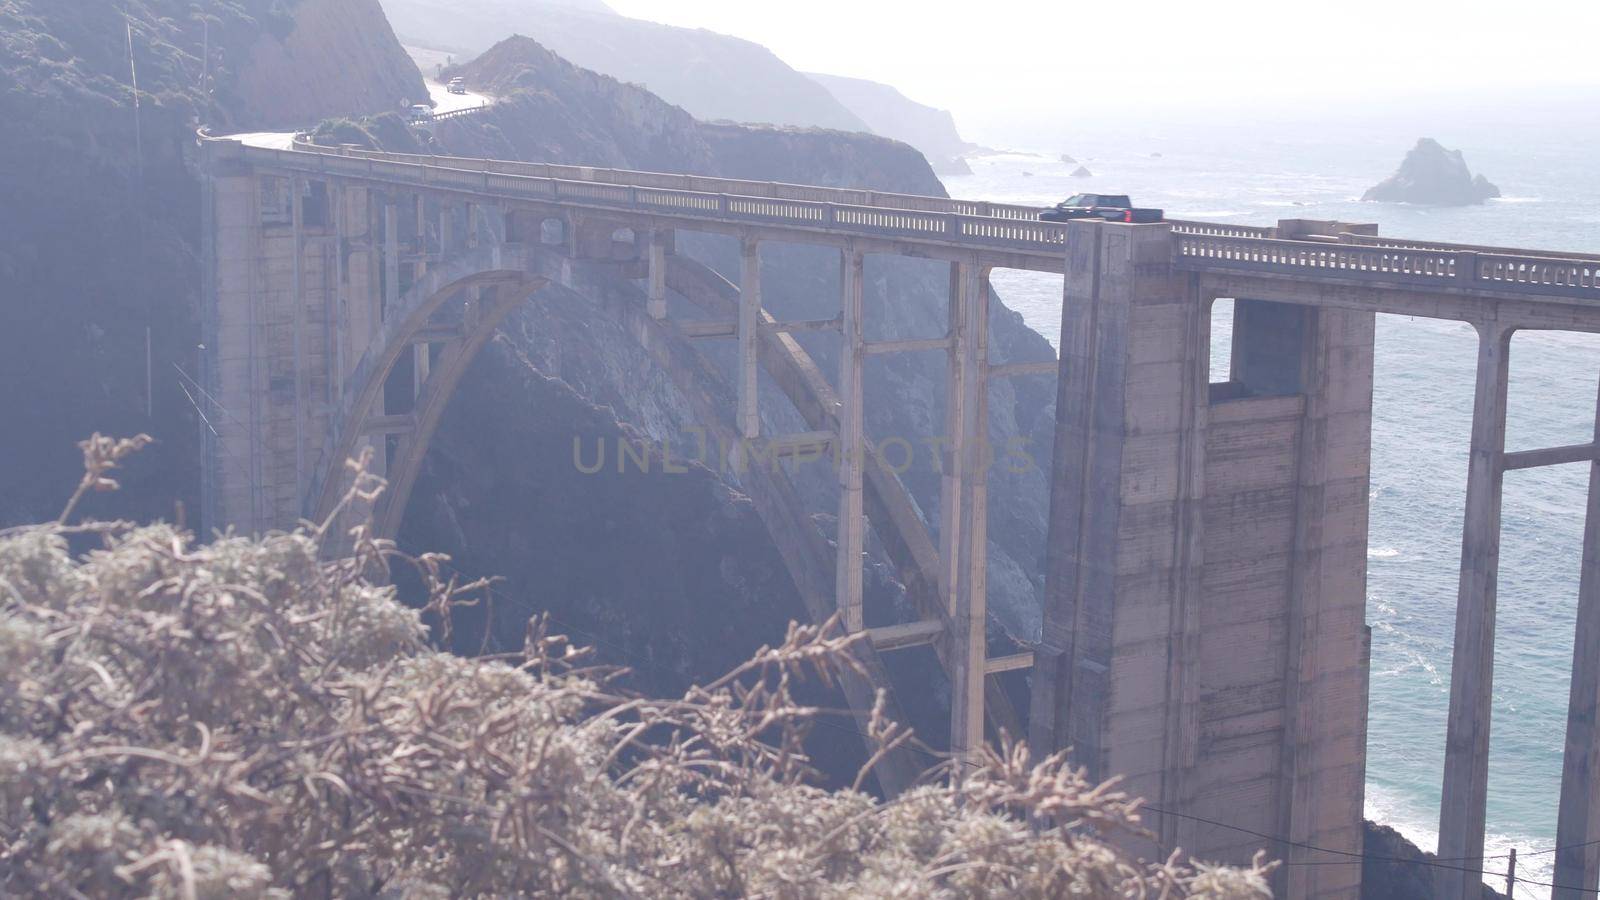 Bixby creek bridge, arch architecture. Pacific coast highway 1 landmark. Historic scenic Cabrillo road. Coastal road trip, journey or travel by ocean. Canyon in foggy weather. California, Big Sur, USA